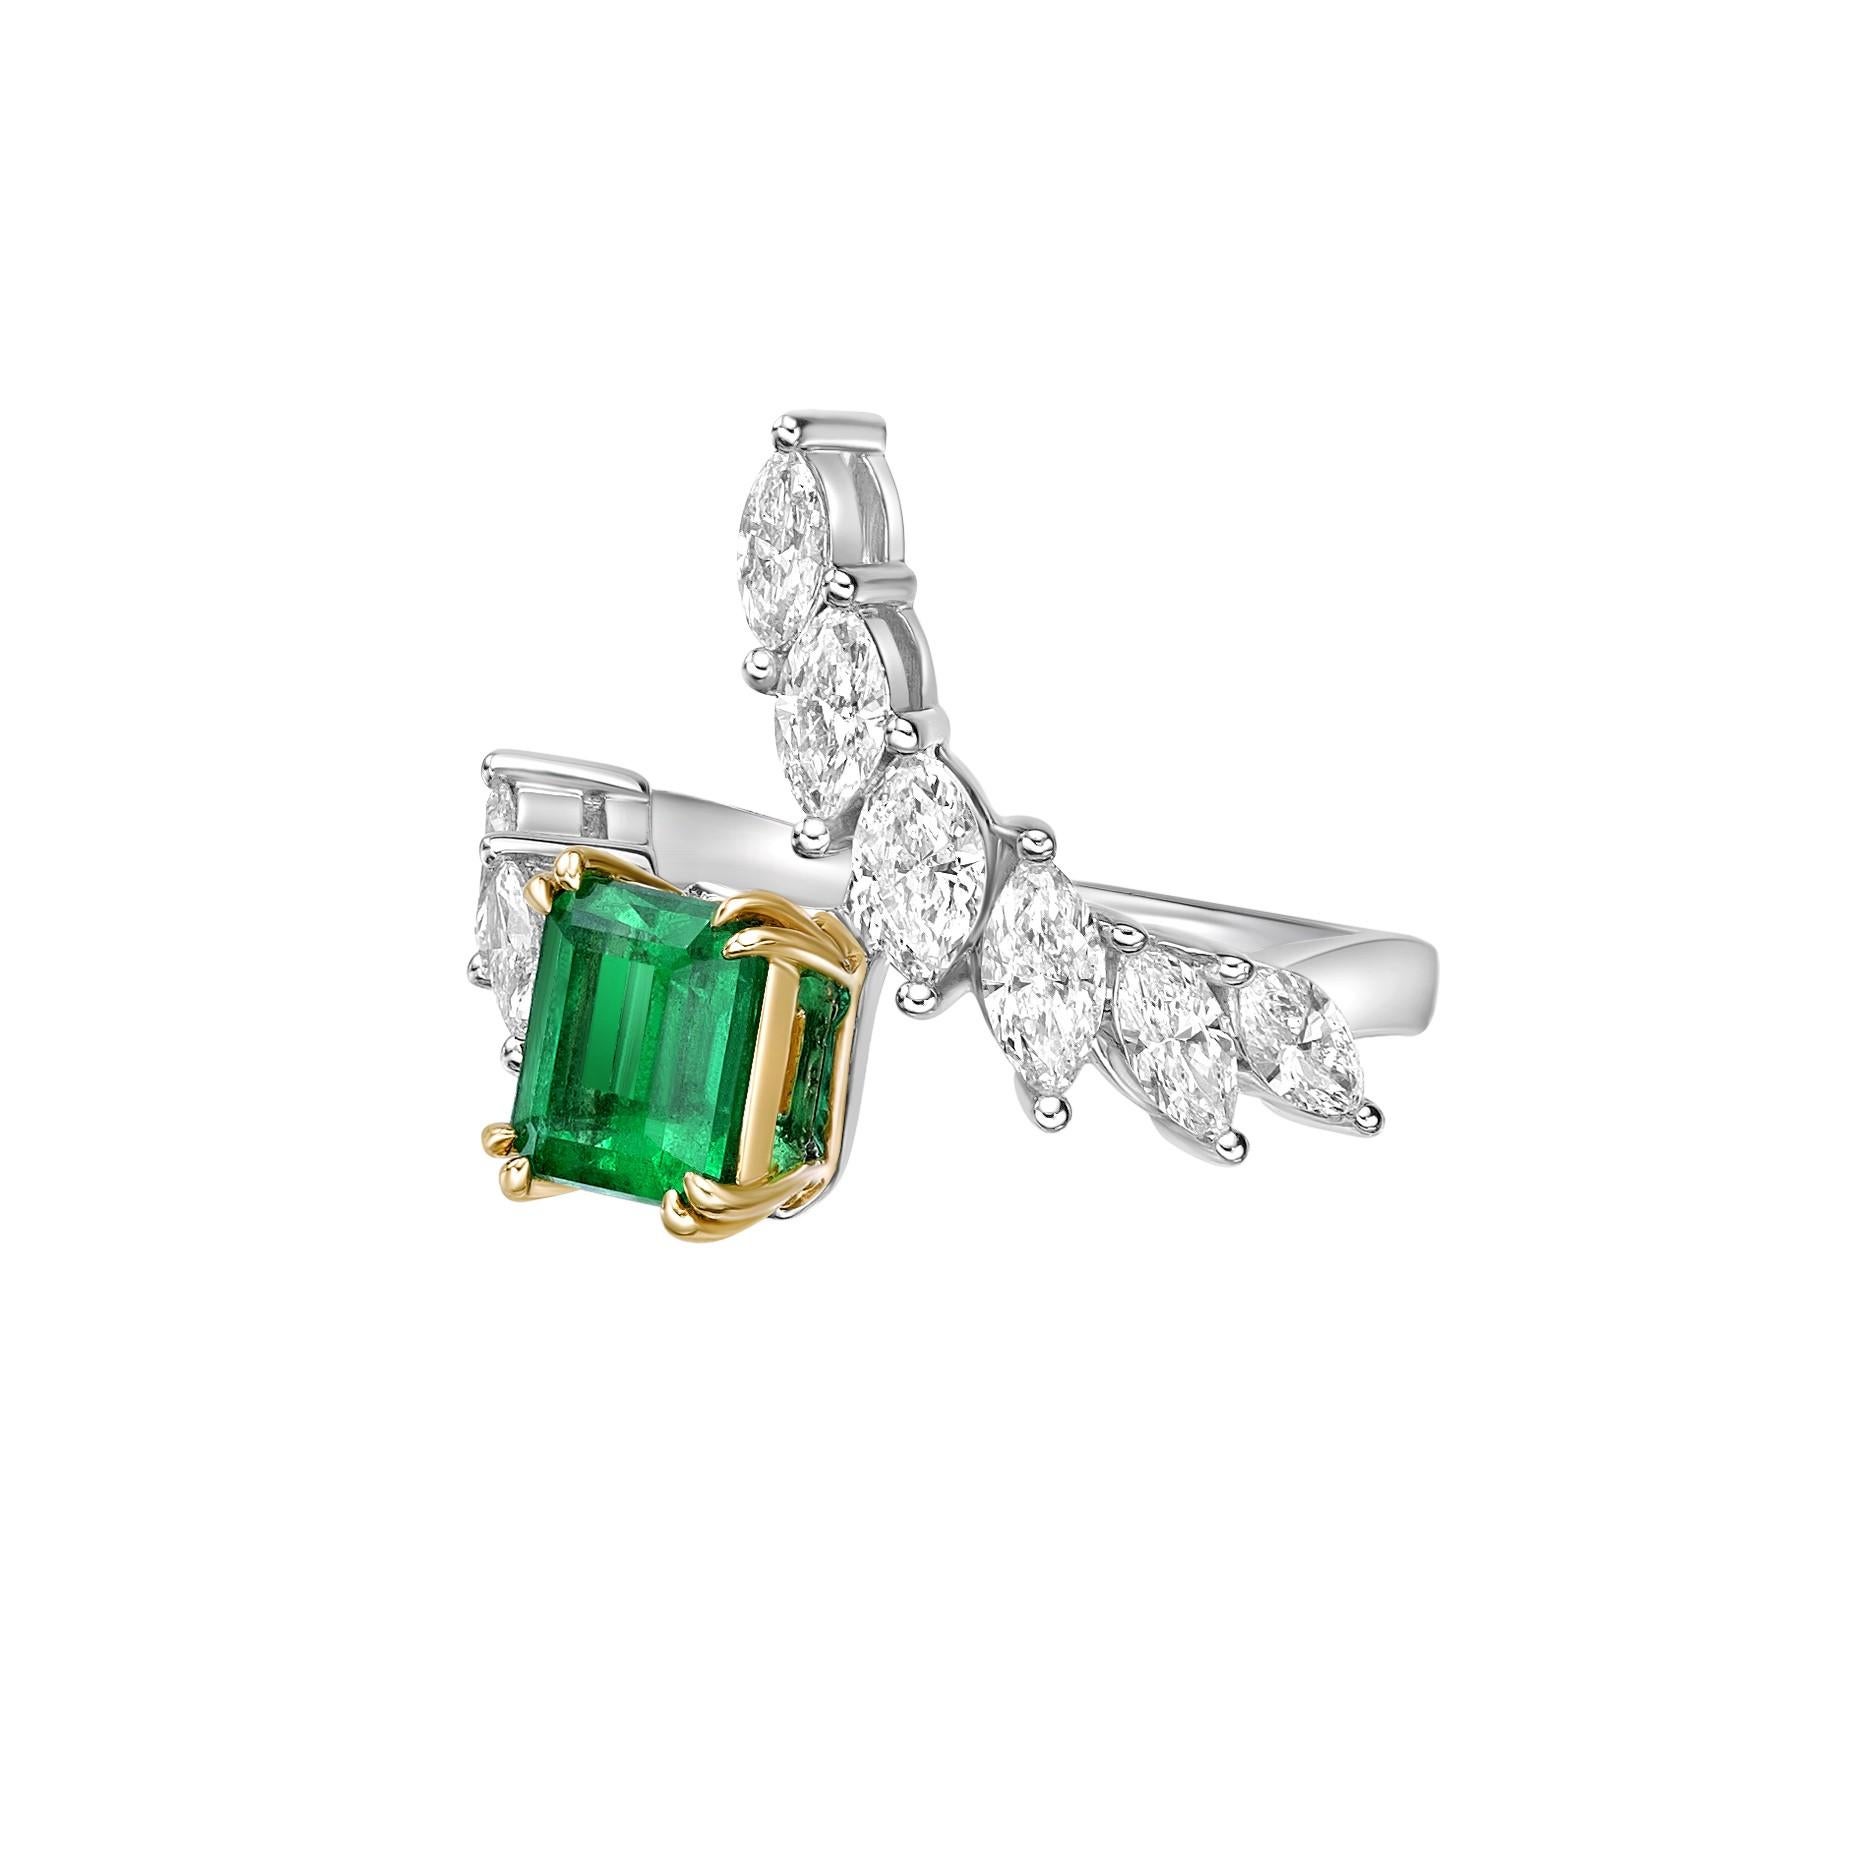 Octagon Cut 1.46 Carat Emerald Fancy Ring in 18Karat Yellow Gold with White Diamond. For Sale